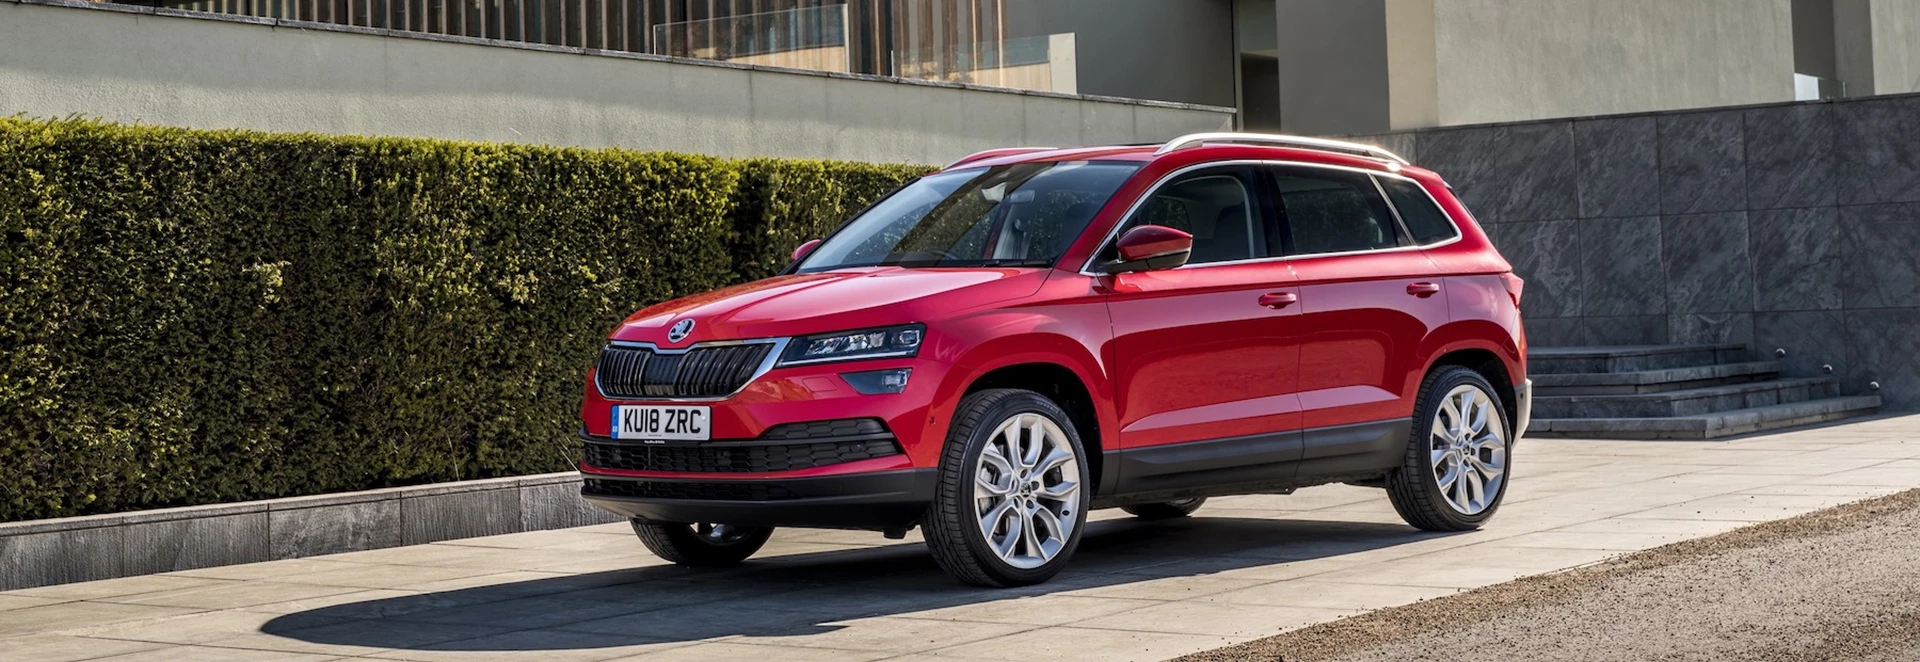 5 practical touches that make the Skoda Karoq a great family car 